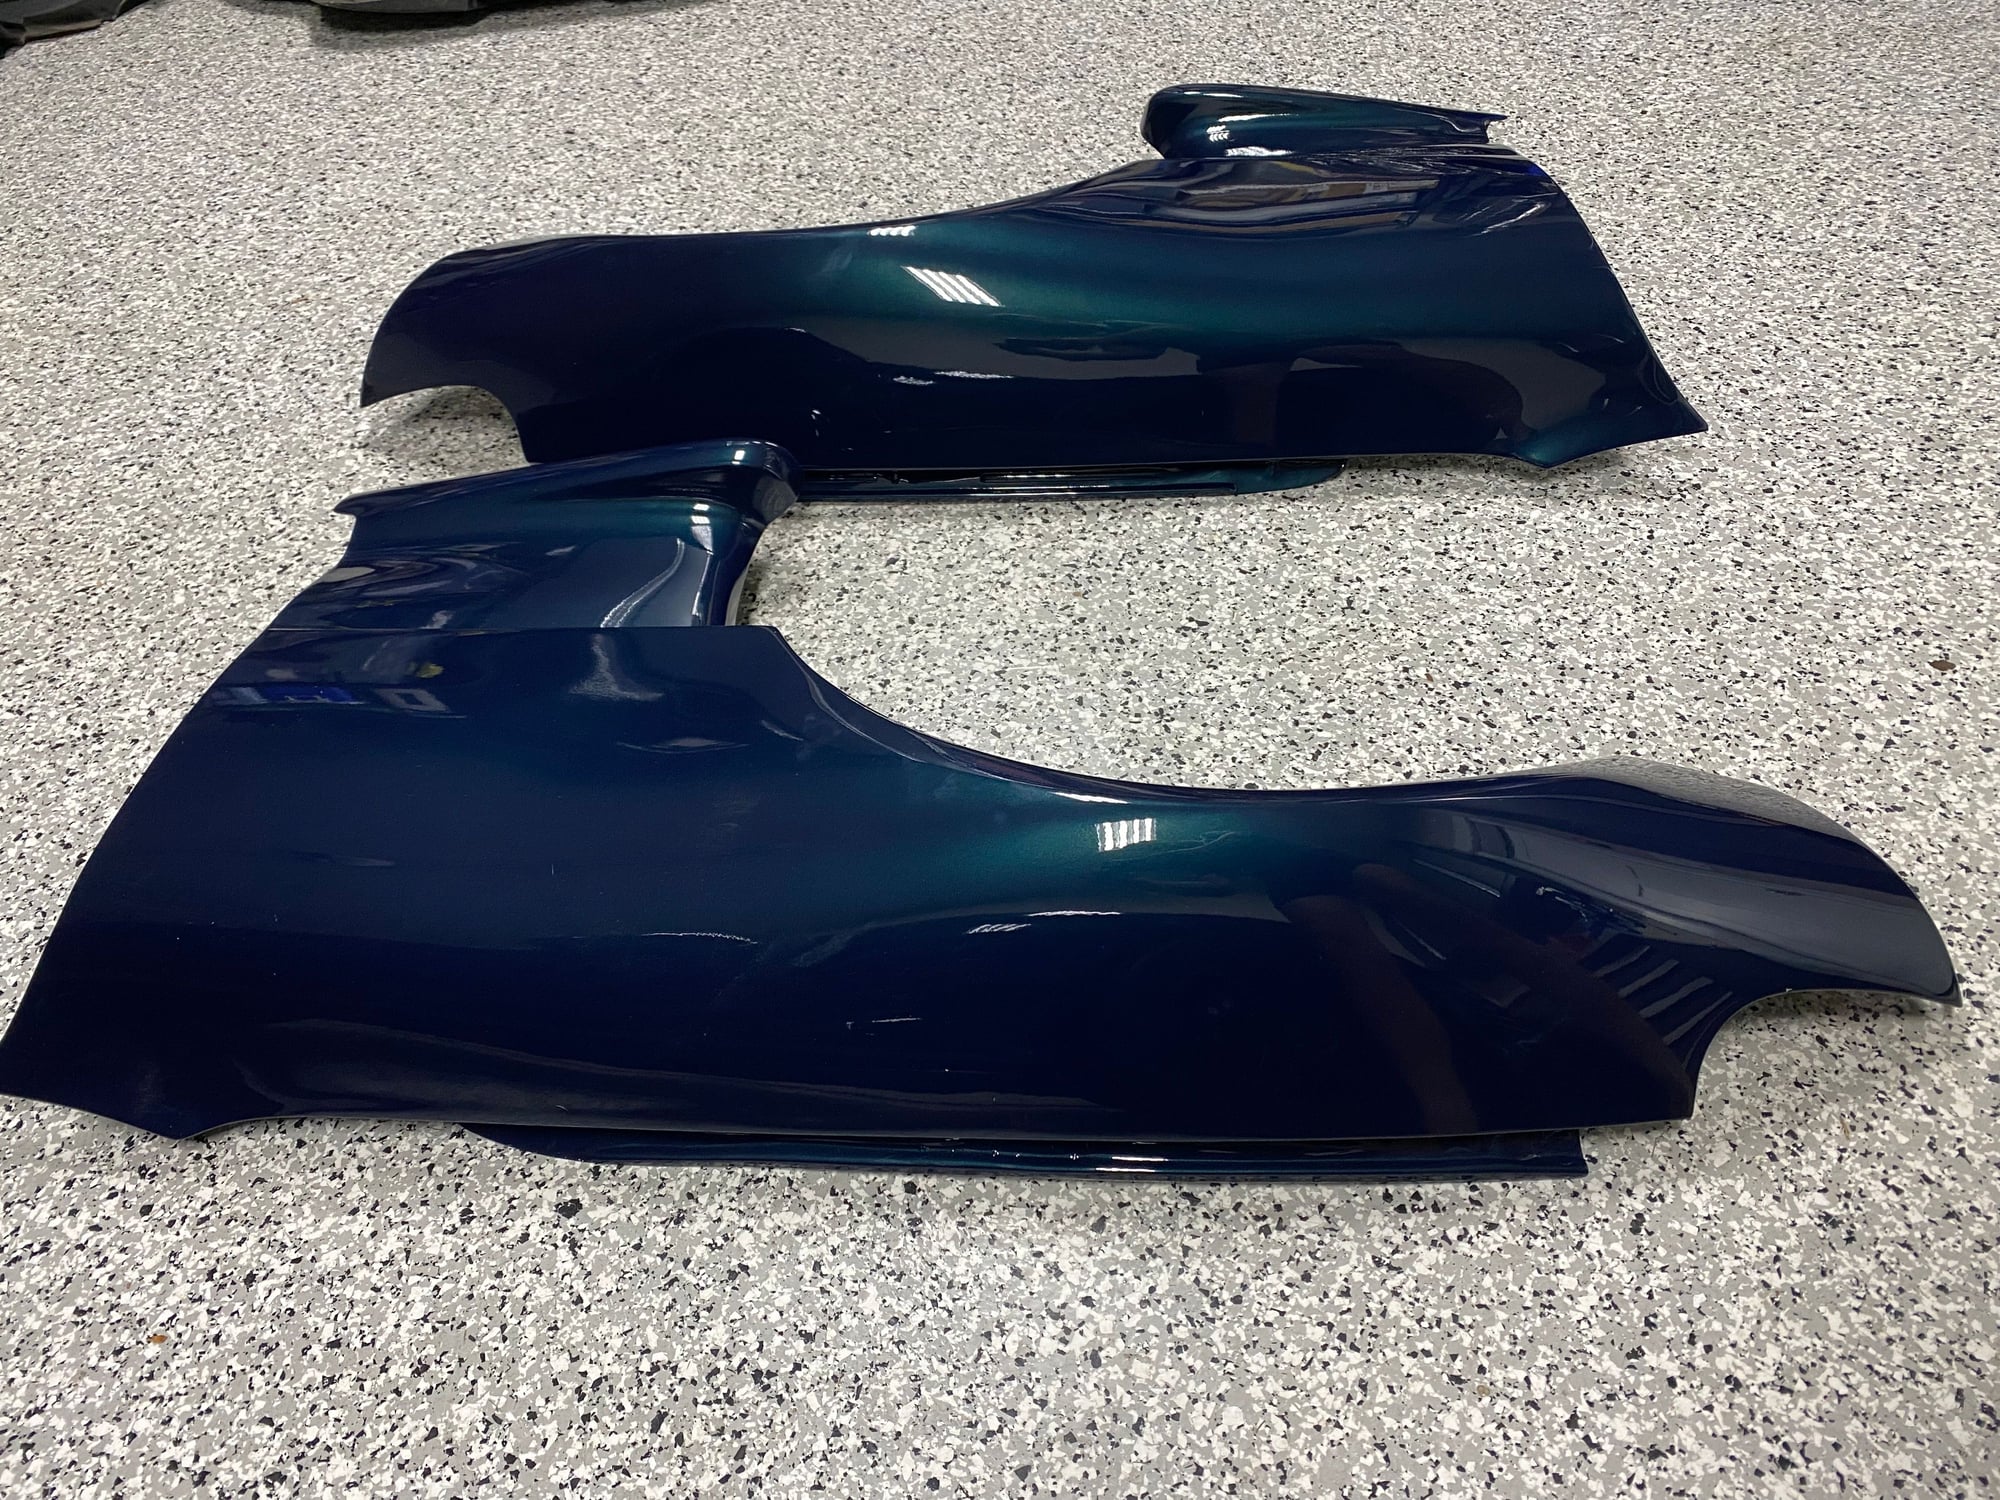 Exterior Body Parts - FEED style front fenders - New - 1993 to 2002 Mazda RX-7 - Bend, OR 97701, United States